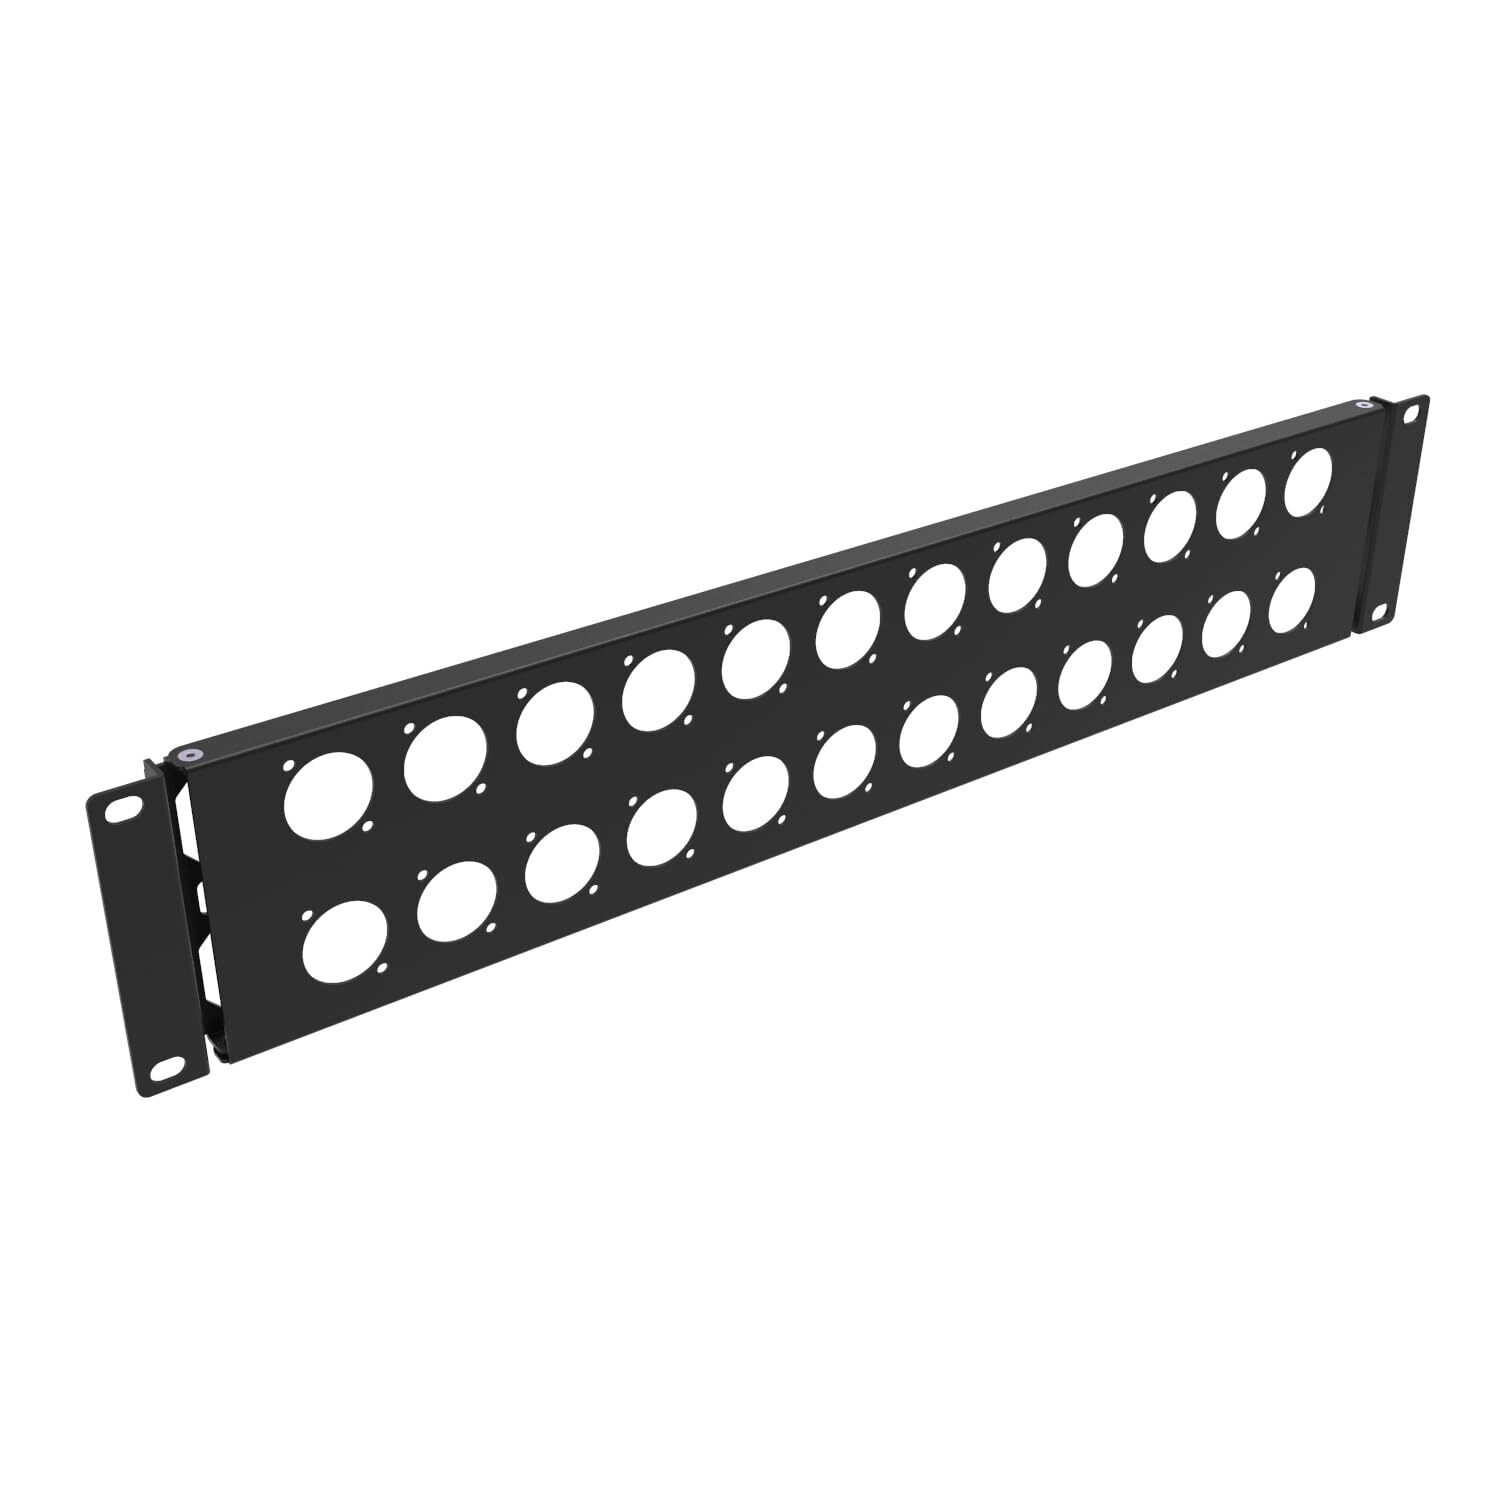 2U Hinged Blank Patch Panel with 24 D-Series Connectors Punch-Out Holes for 1...